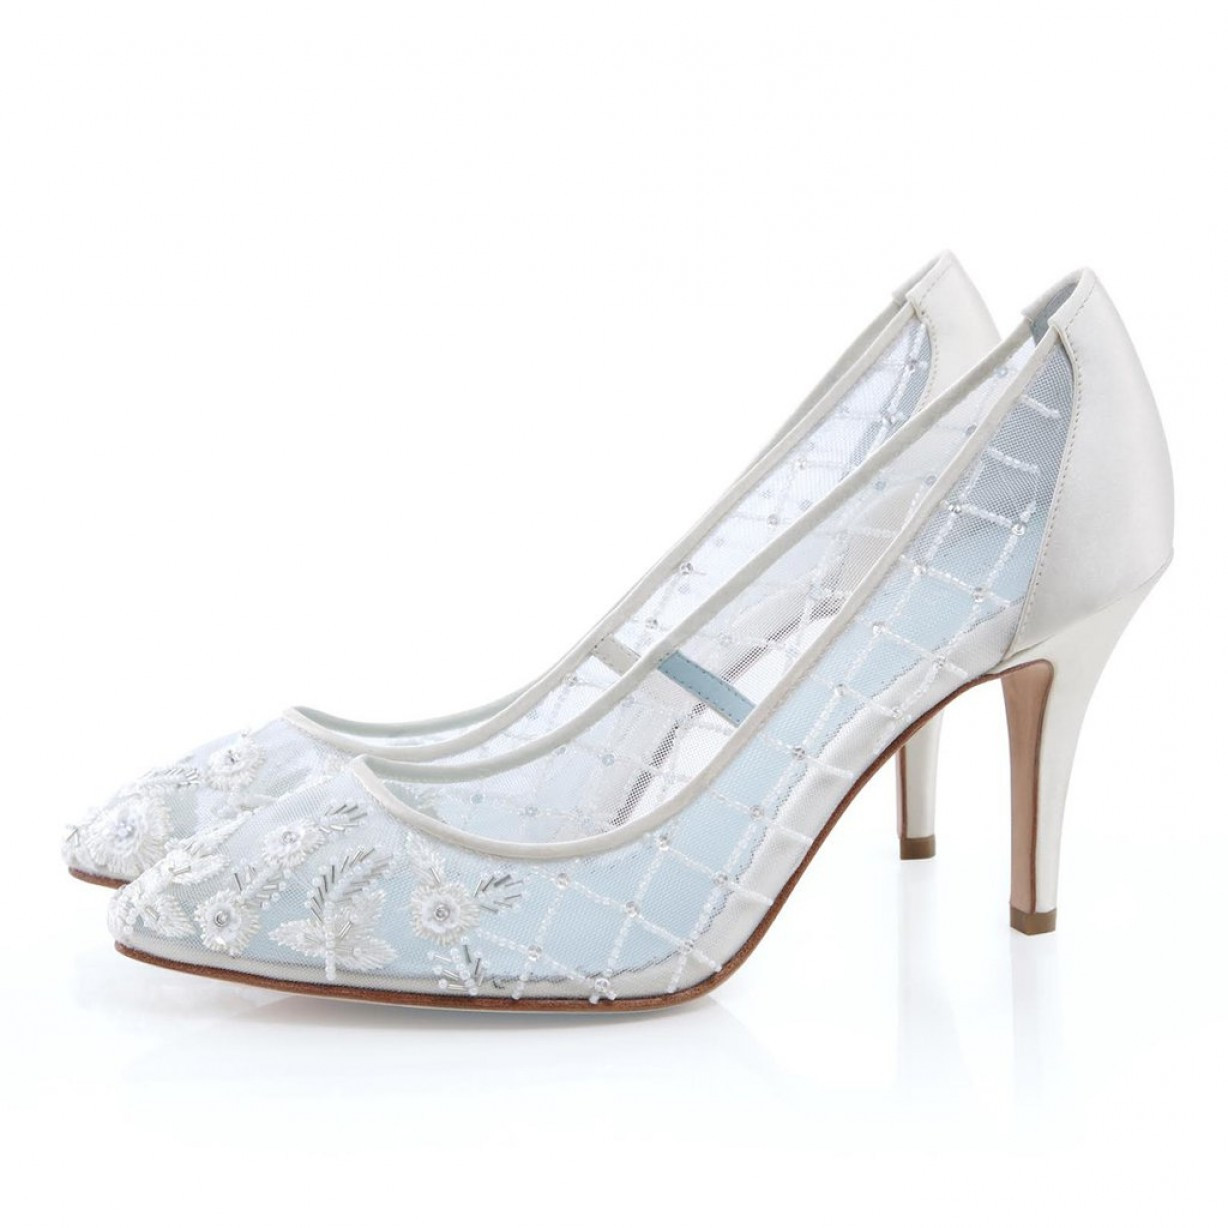 Comfortable Ivory Wedding Shoes
 Bridal Shoes fortable